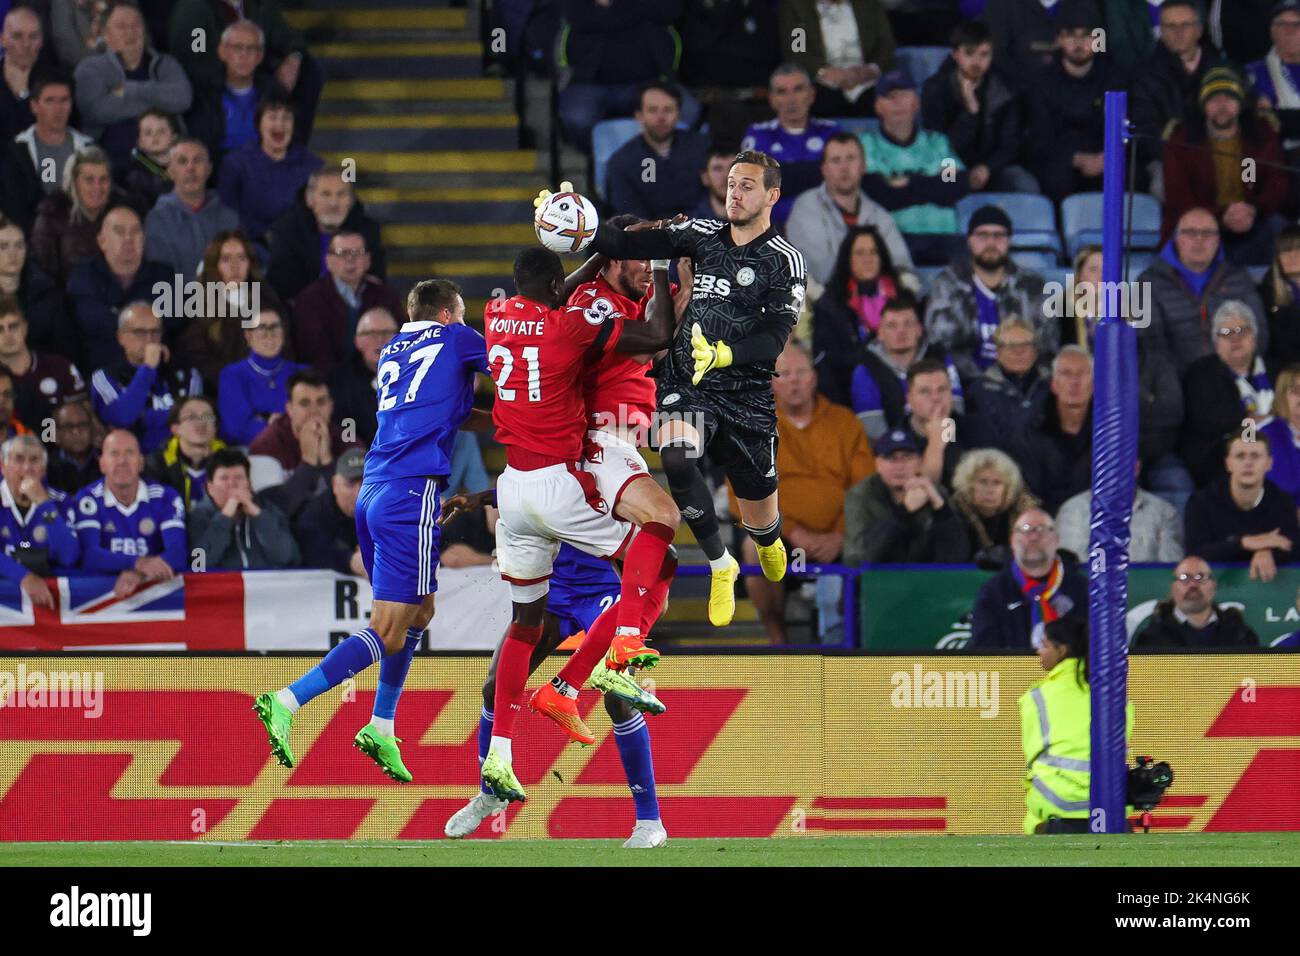 Danny Ward #1 of Leicester City claims the ball from a free kick during the Premier League match Leicester City vs Nottingham Forest at King Power Stadium, Leicester, United Kingdom, 3rd October 2022  (Photo by Mark Cosgrove/News Images) Stock Photo